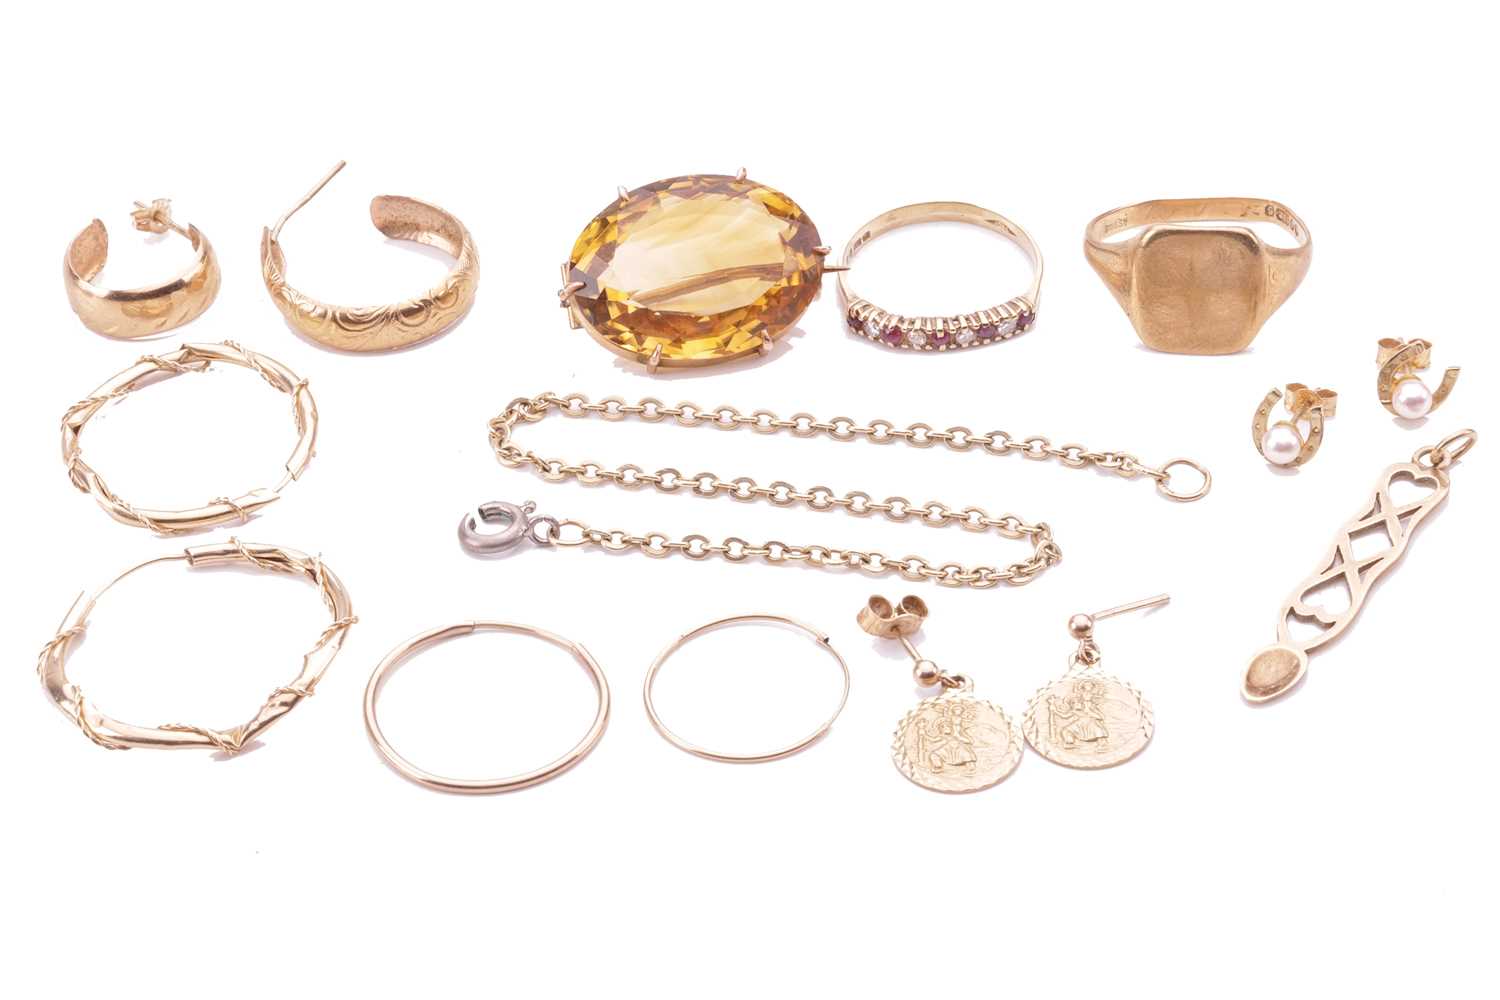 A collection of jewellery items comprising an oval citrine brooch in a yellow metal setting tested a